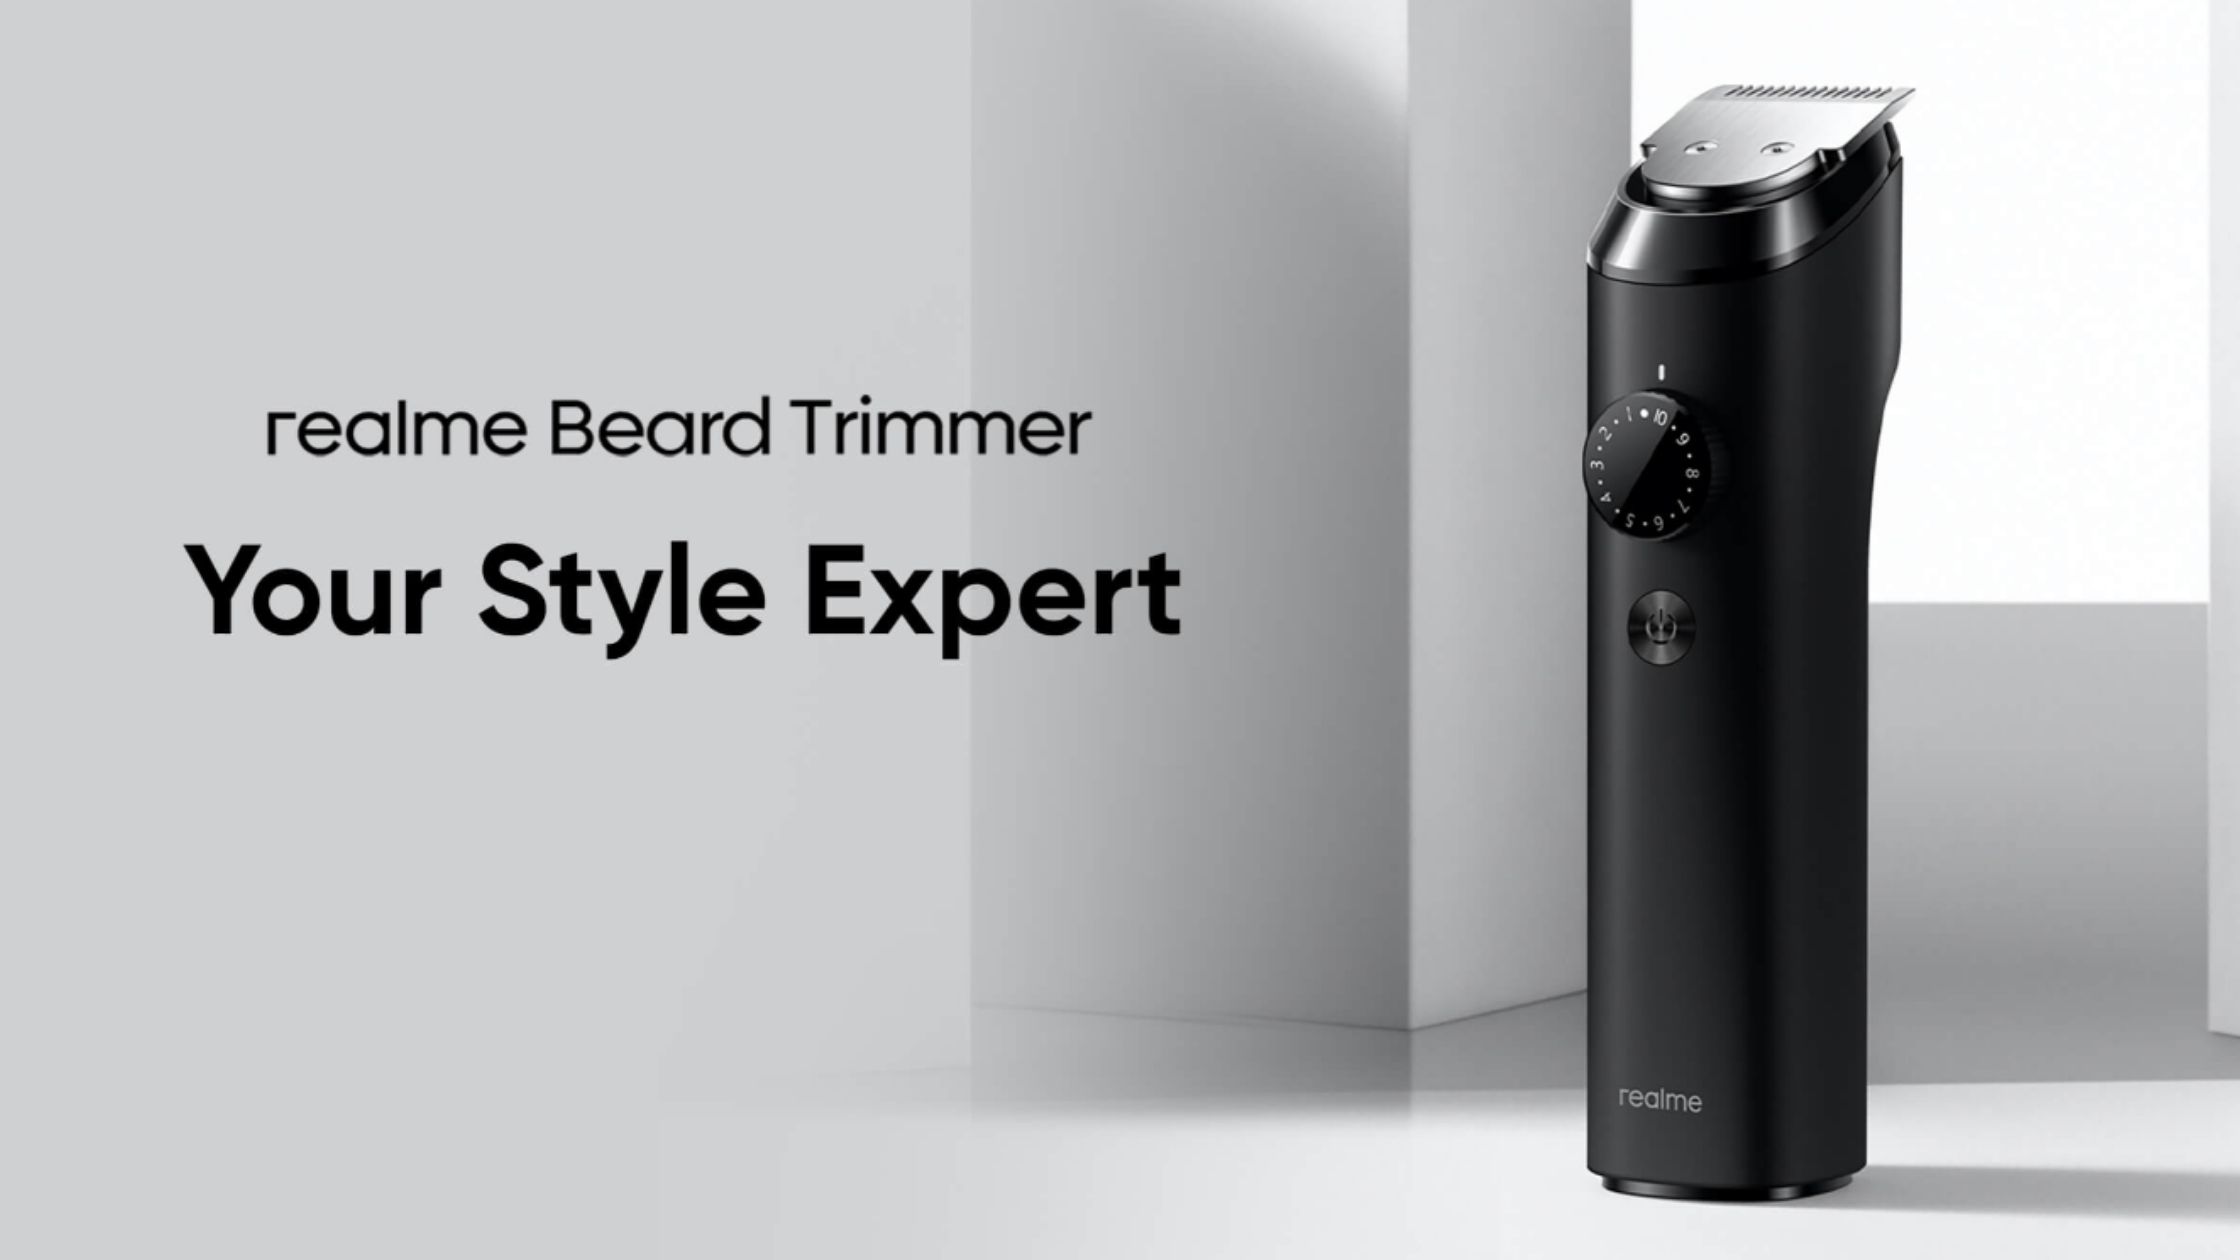 Realme Buds 2, trimmer, and hair dryer to launch on July 1 in India |  TechRadar